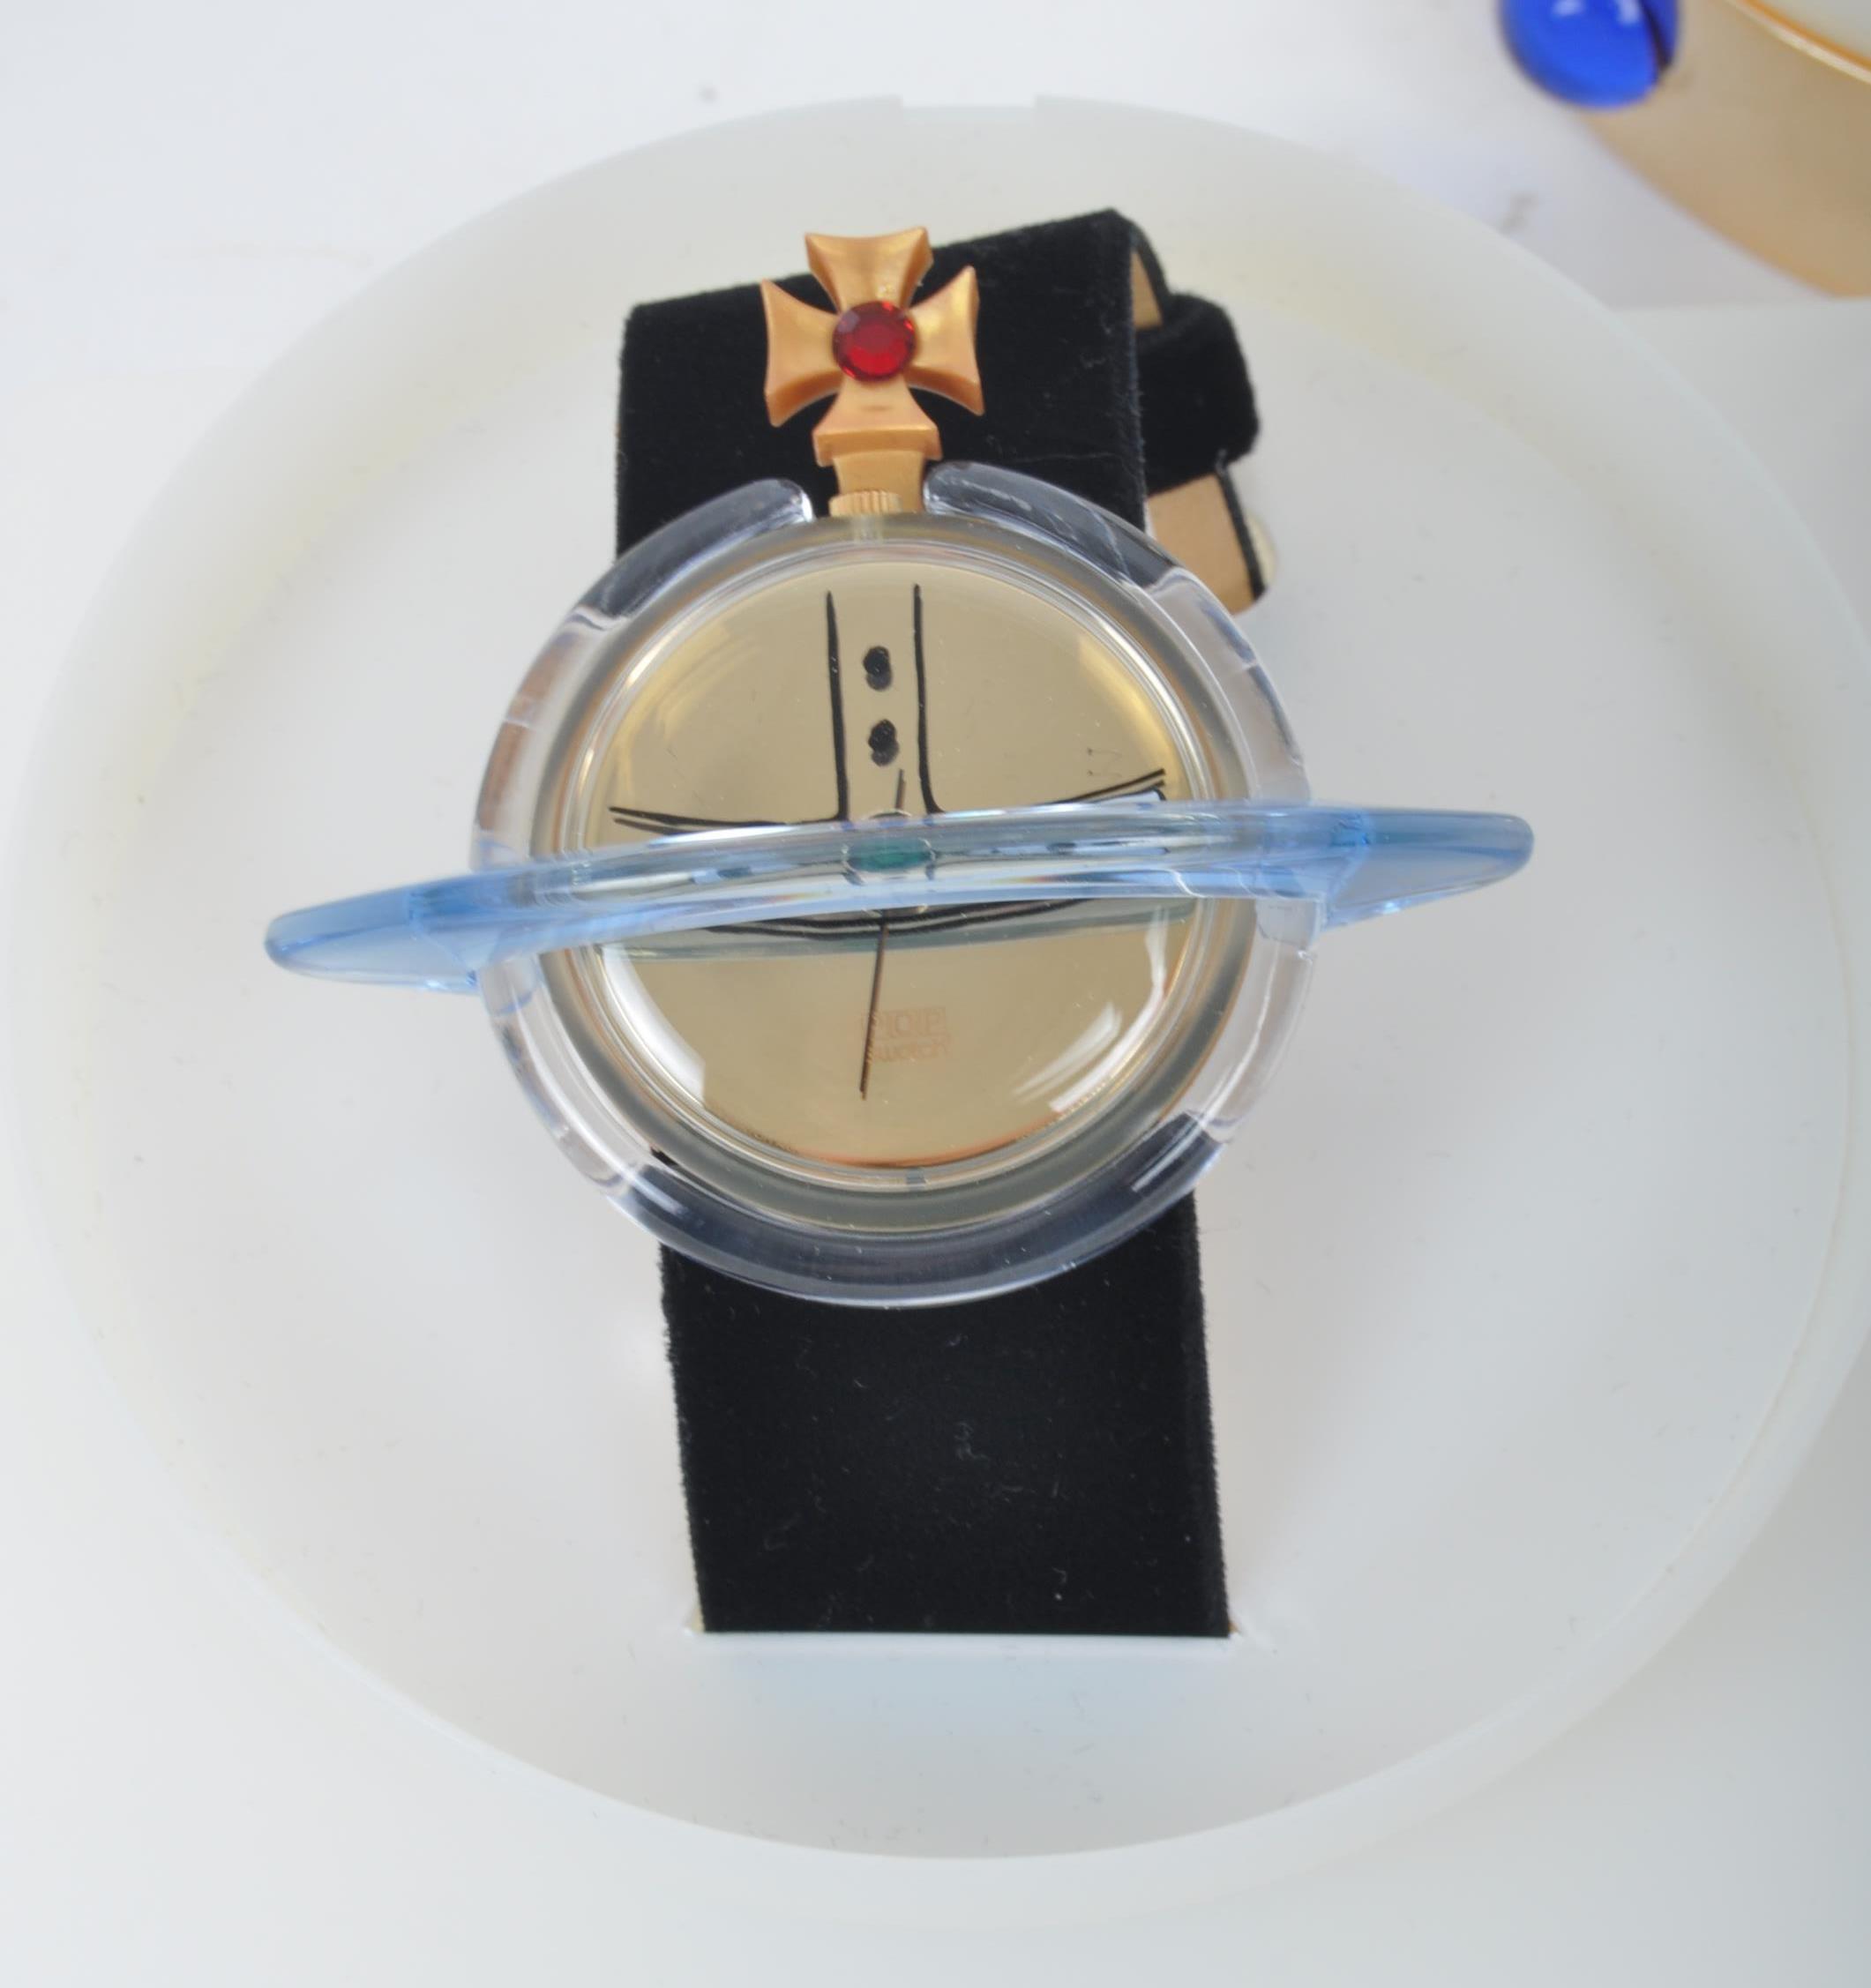 VIVIENNE WESTWOOD X POP SWATCH - ORB - LIMITED ED. 1993 WATCH - Image 4 of 6